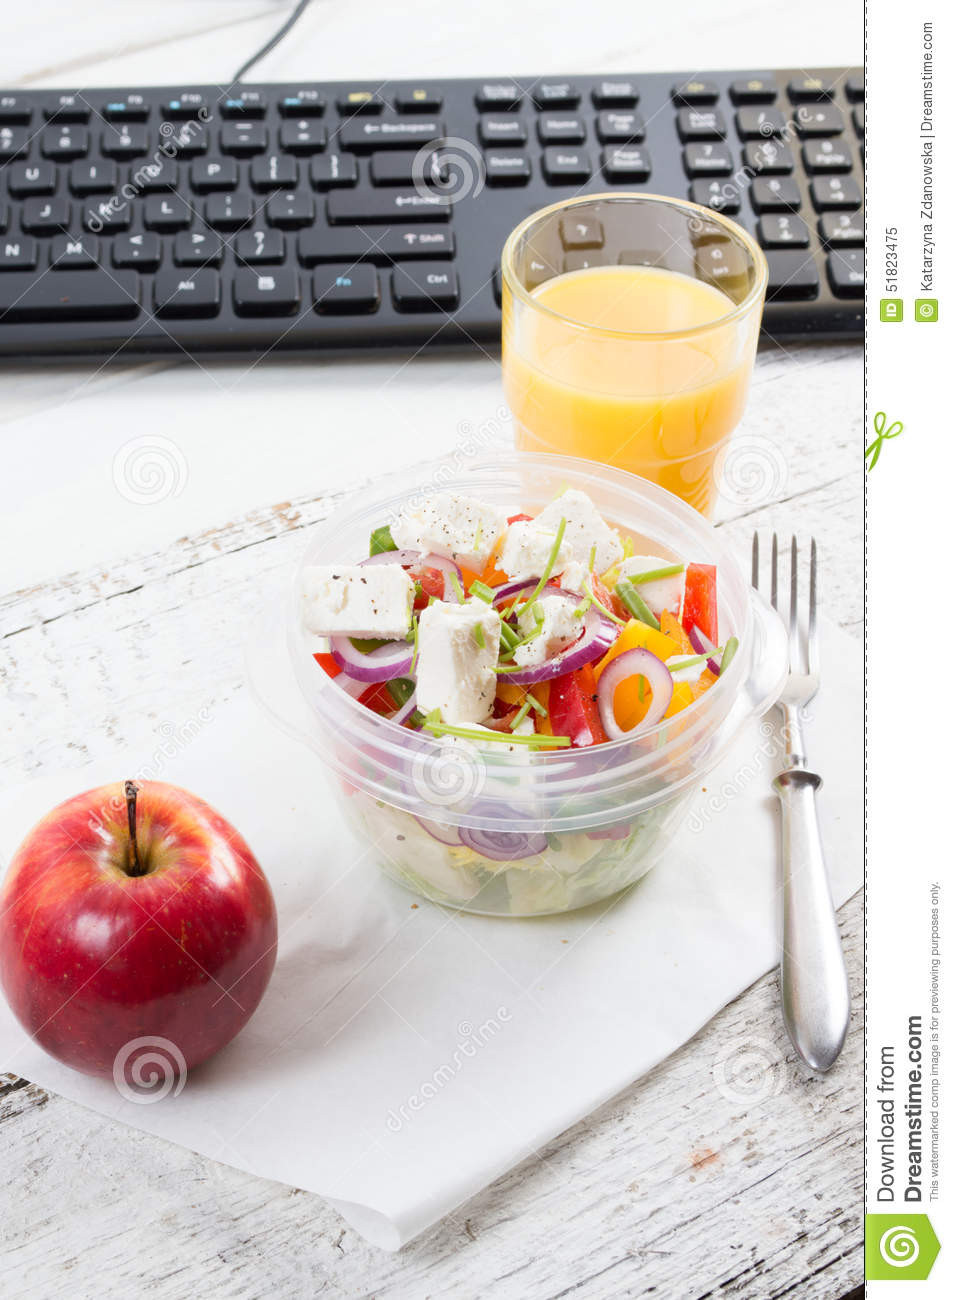 Healthy Snacks For Office Workers
 Healthy Eating For Lunch To Work Food In The fice Stock